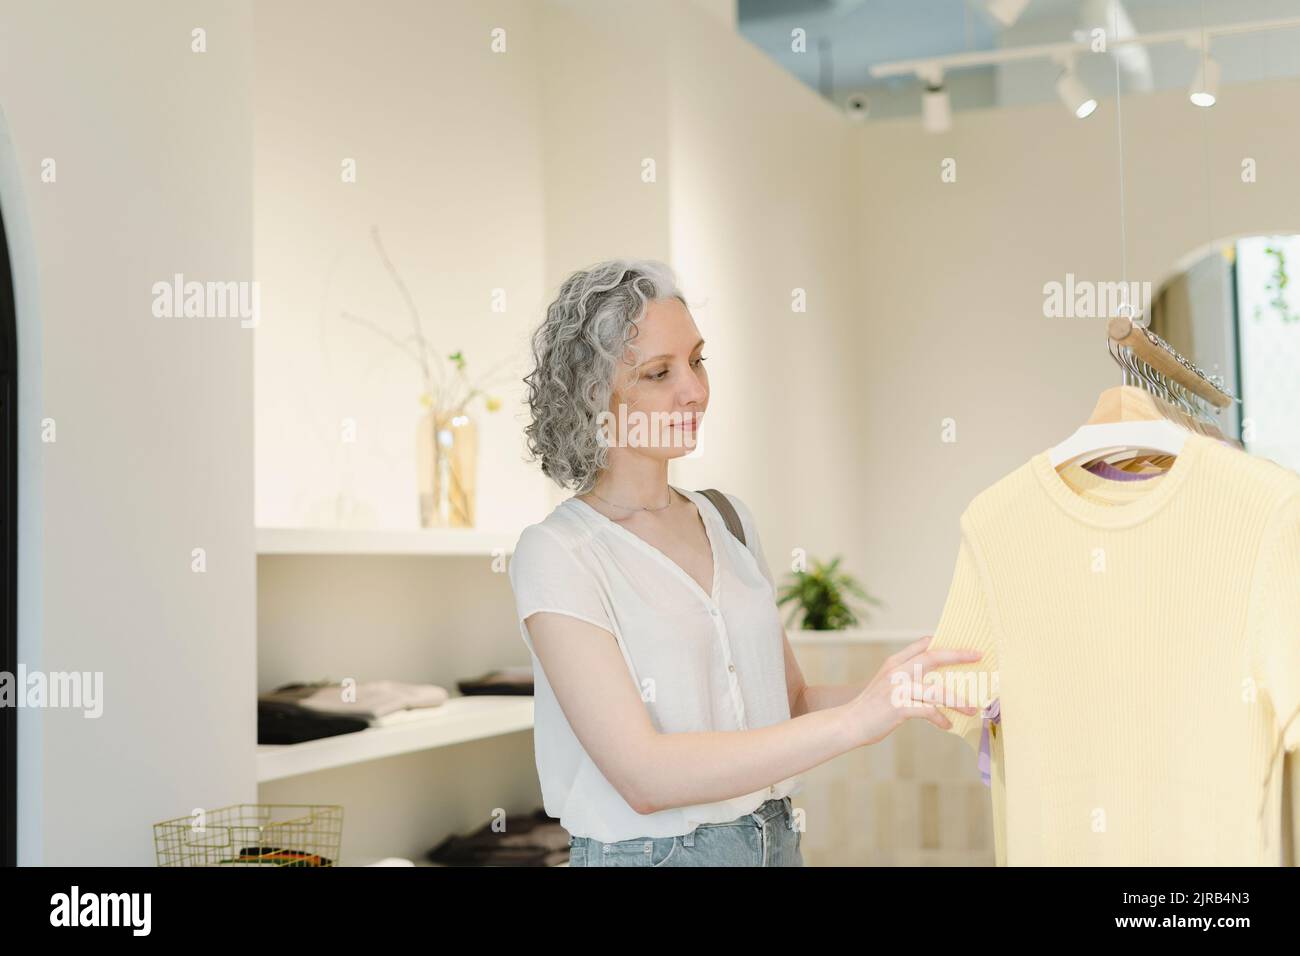 Woman choosing clothes hanging on rack at store Stock Photo